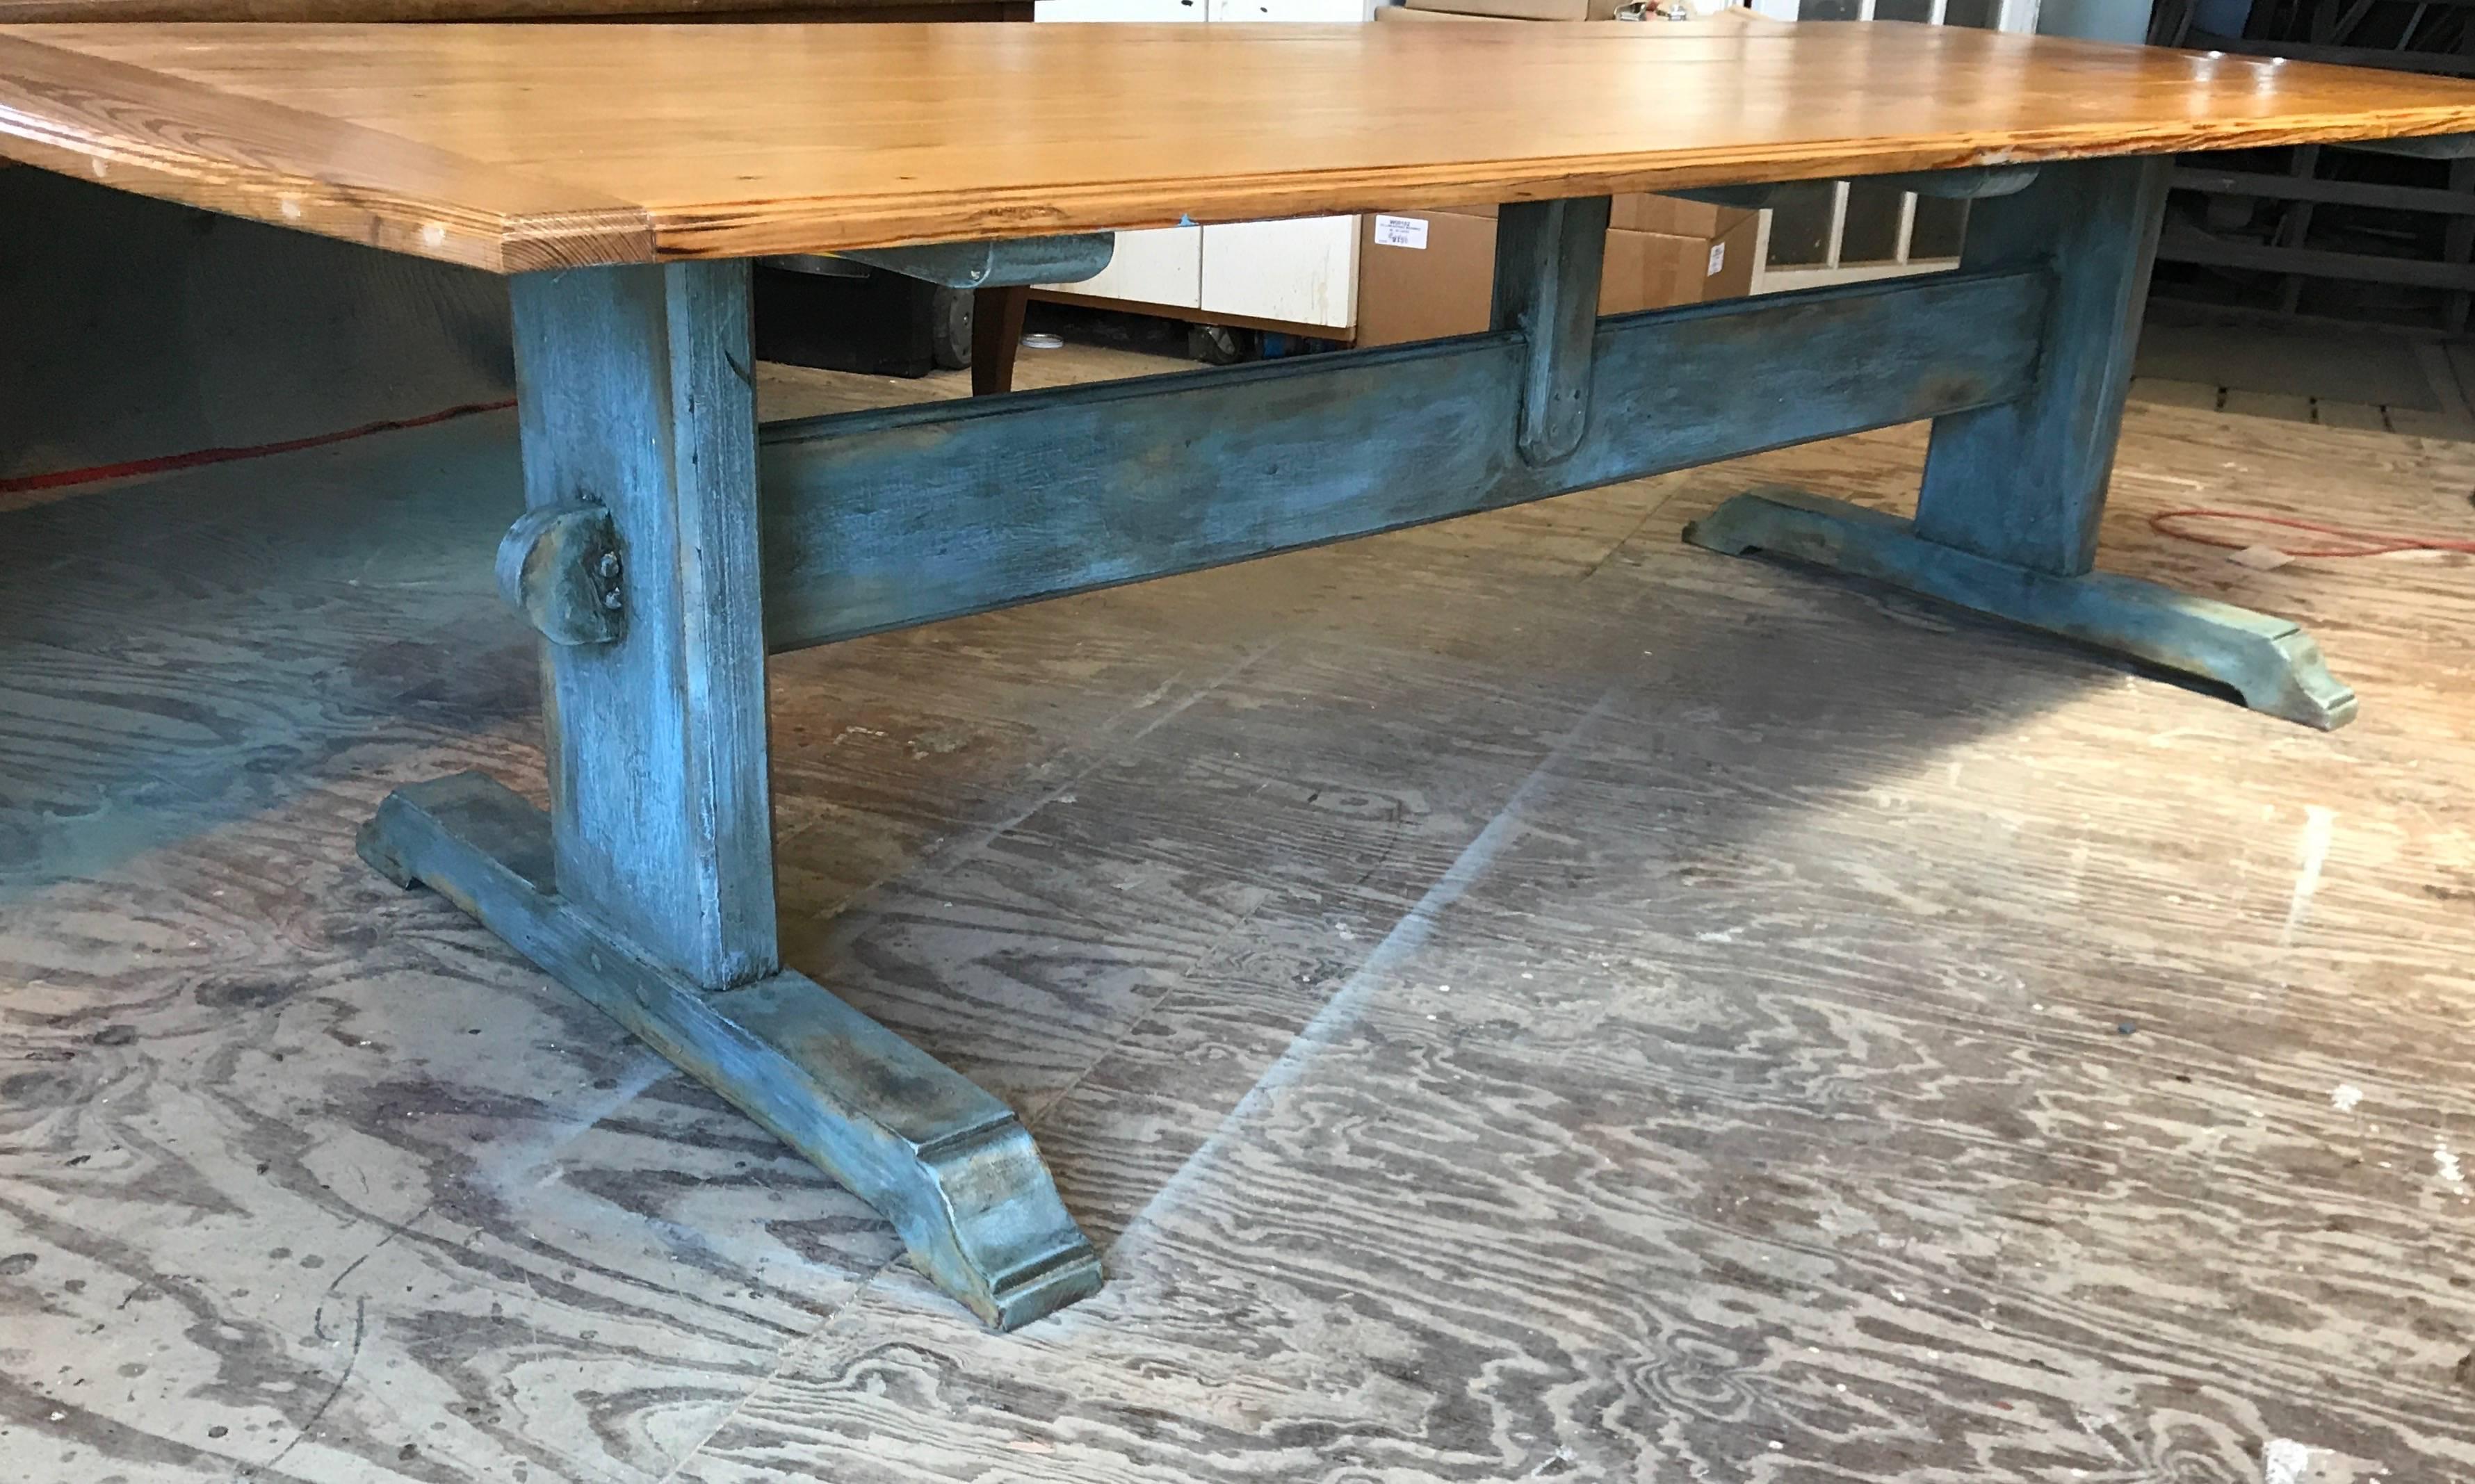 Large 19th century Scandinavian pine dining table with blue painted trestle and molded top that has rounded cleated ends. Scandinavian “Scots” pine with a rich golden color, figured grain, and good patination. A substantial shaped and molded trestle